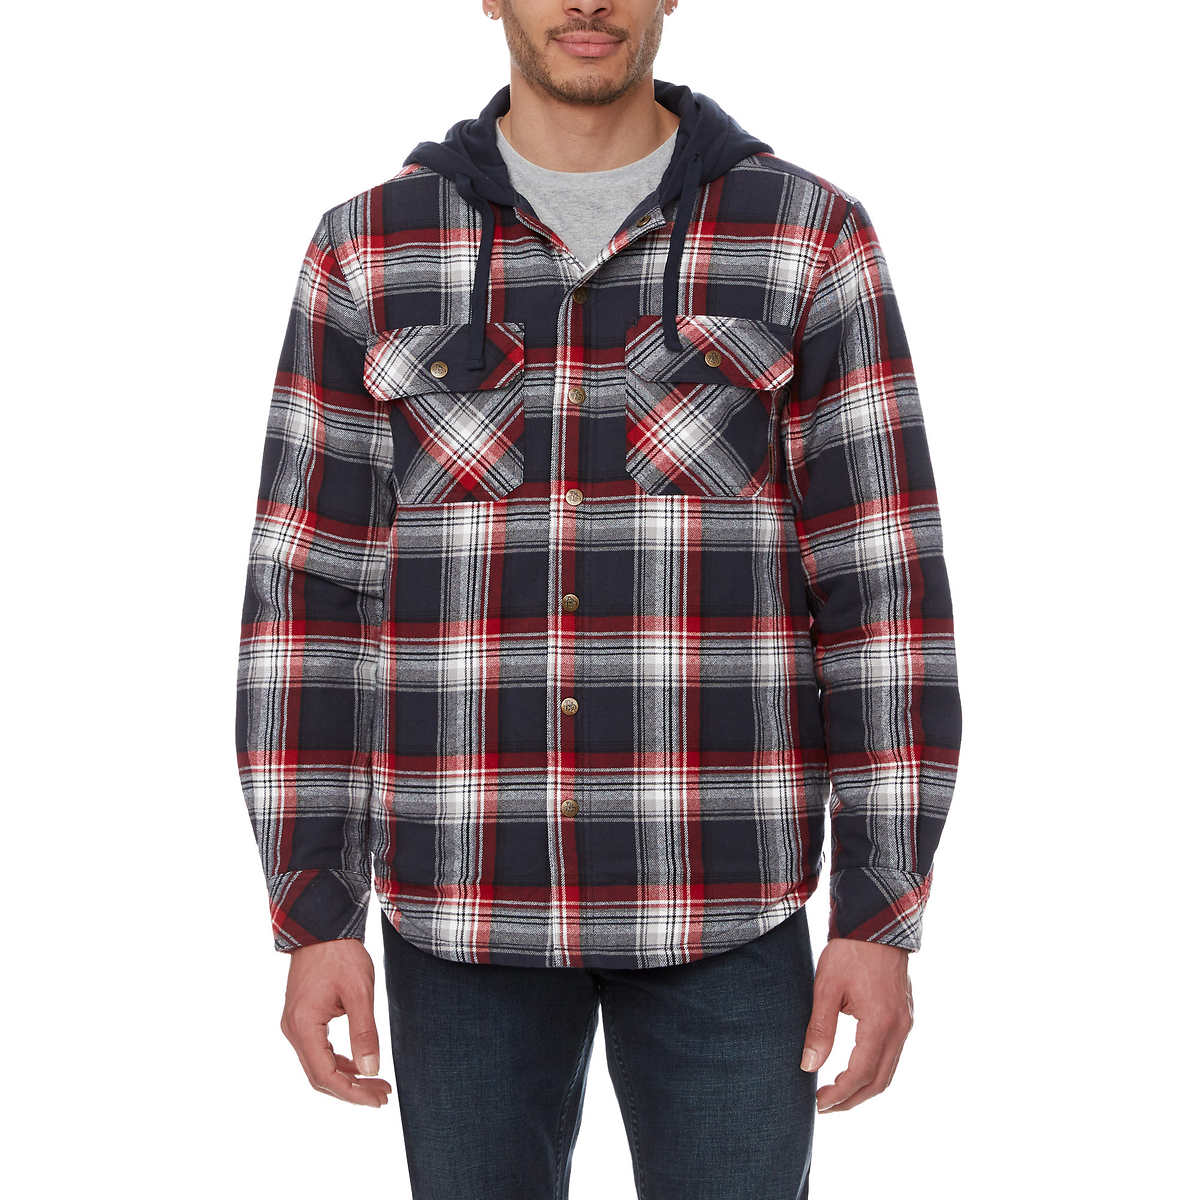 Legendary Outfitters Men's Shirt Jacket with Hood